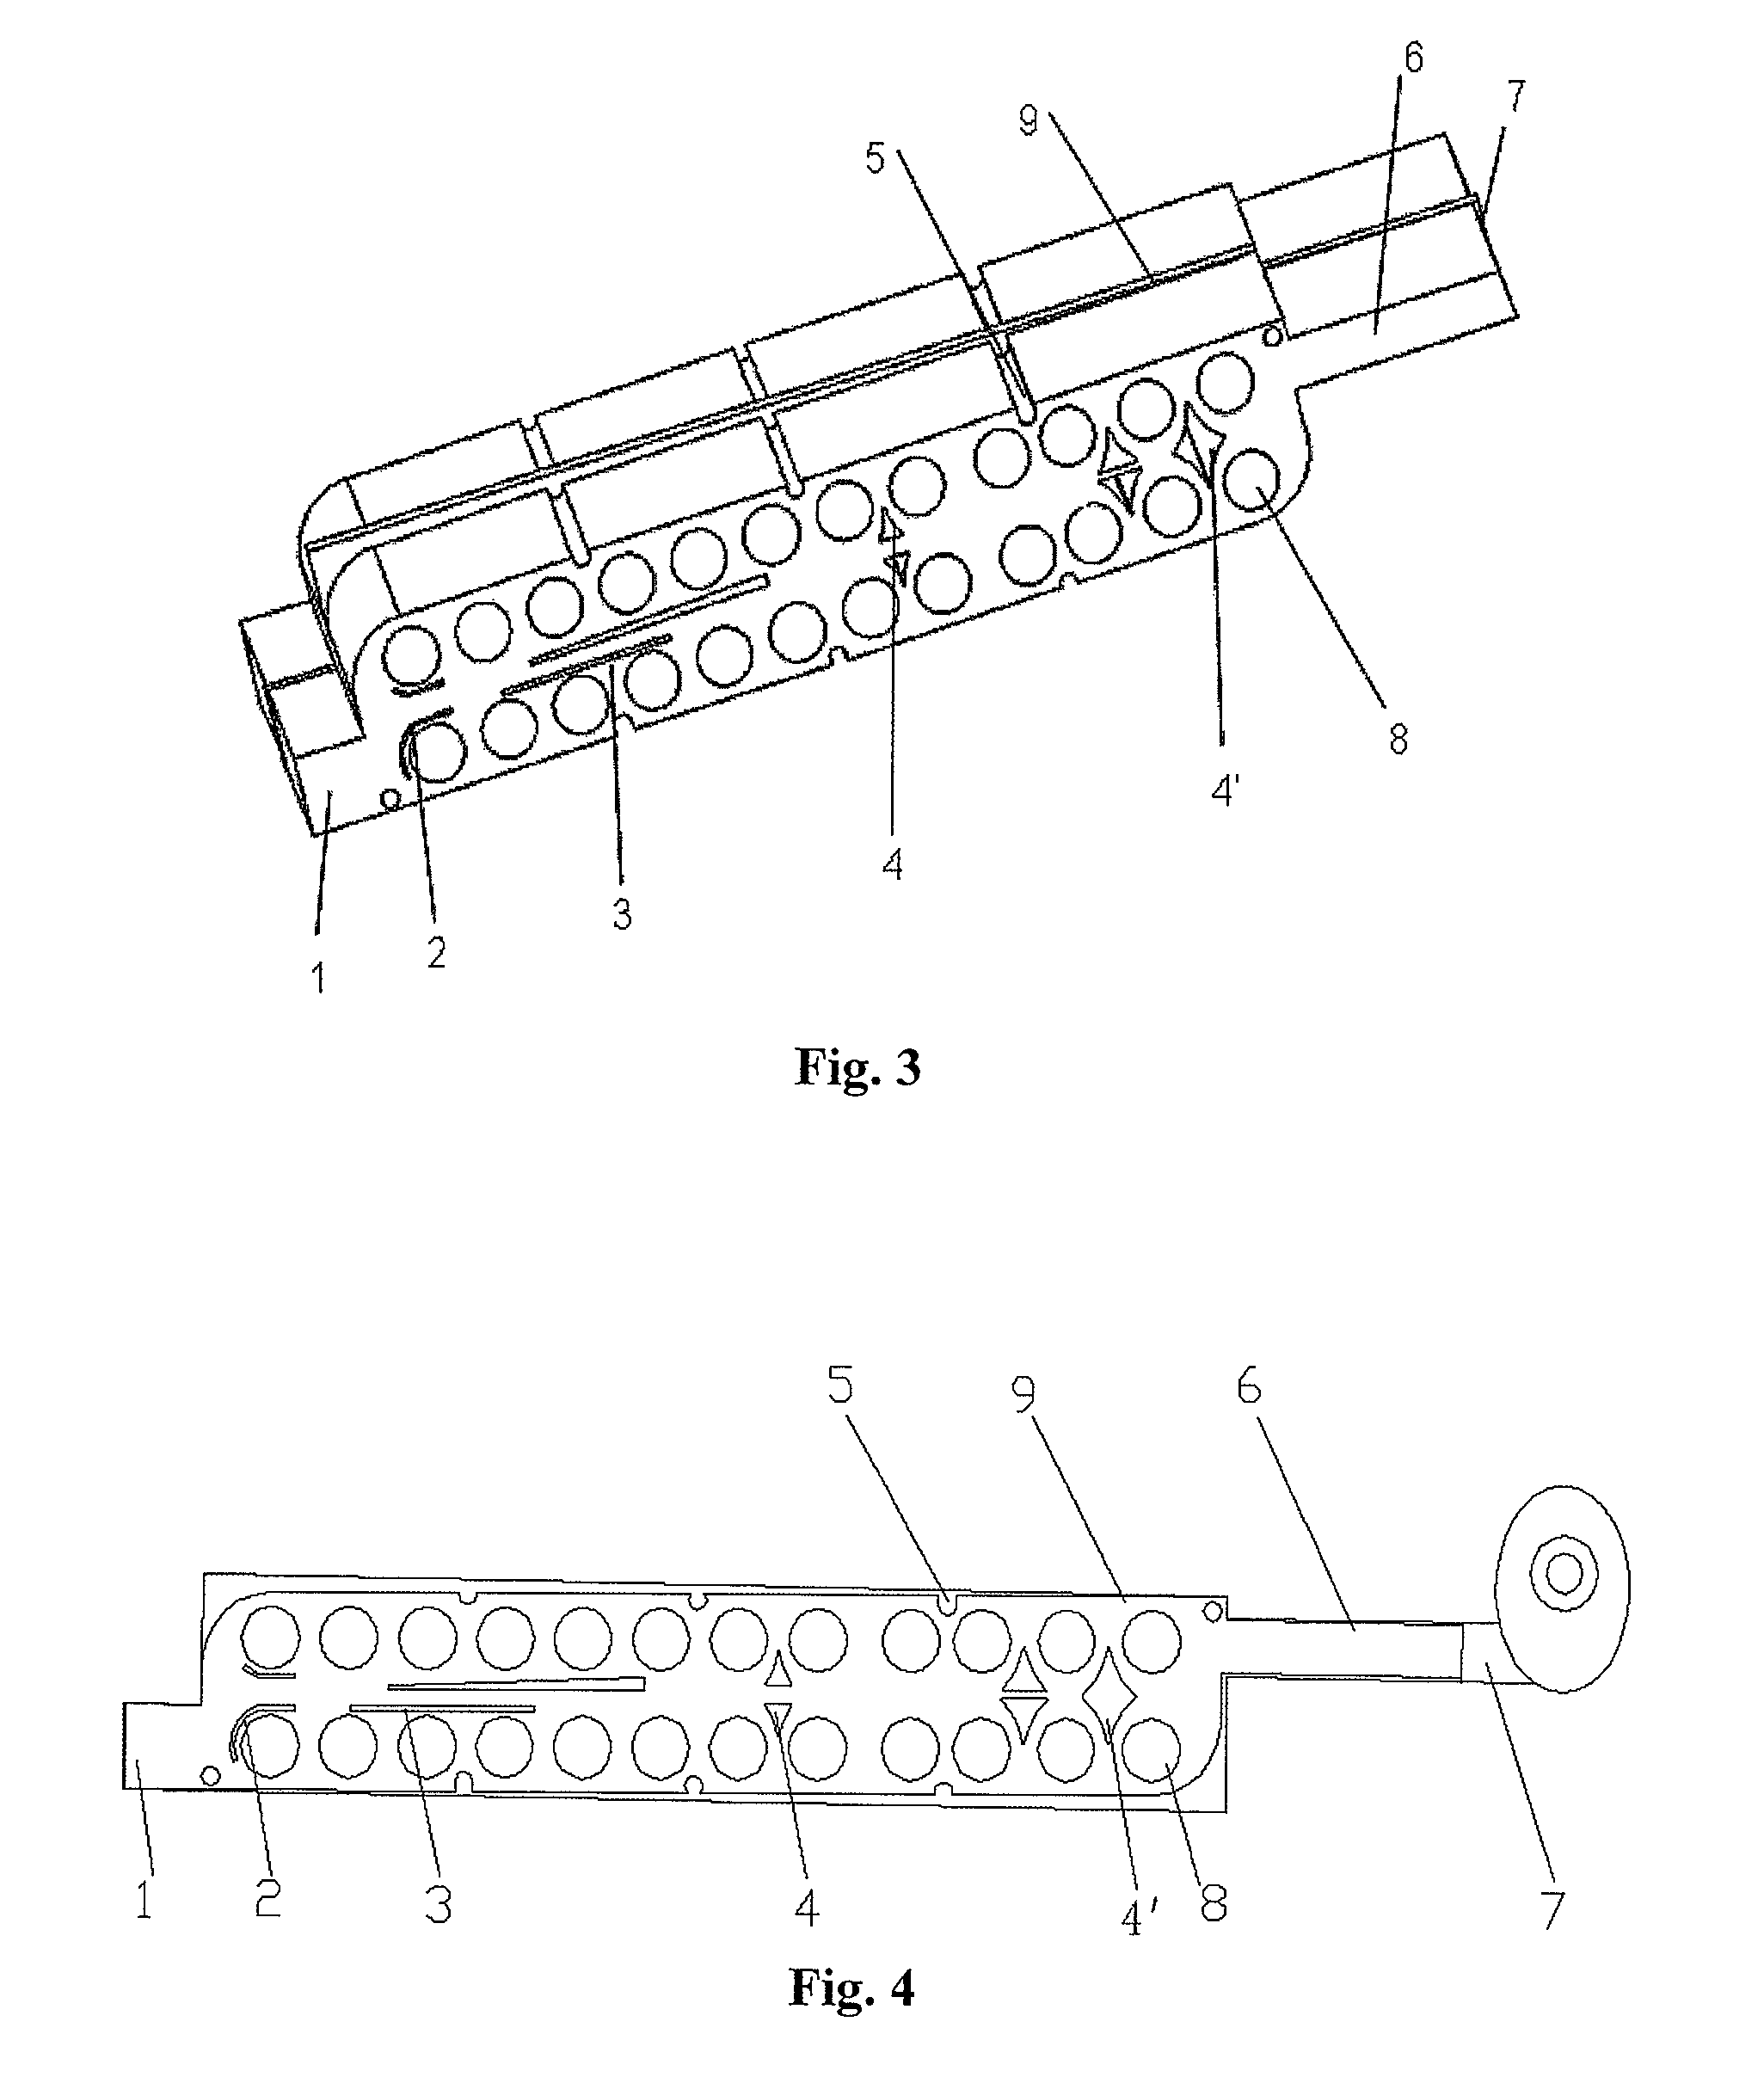 Nickel-hydrogen battery pack heat removal system for hybrid vehicle